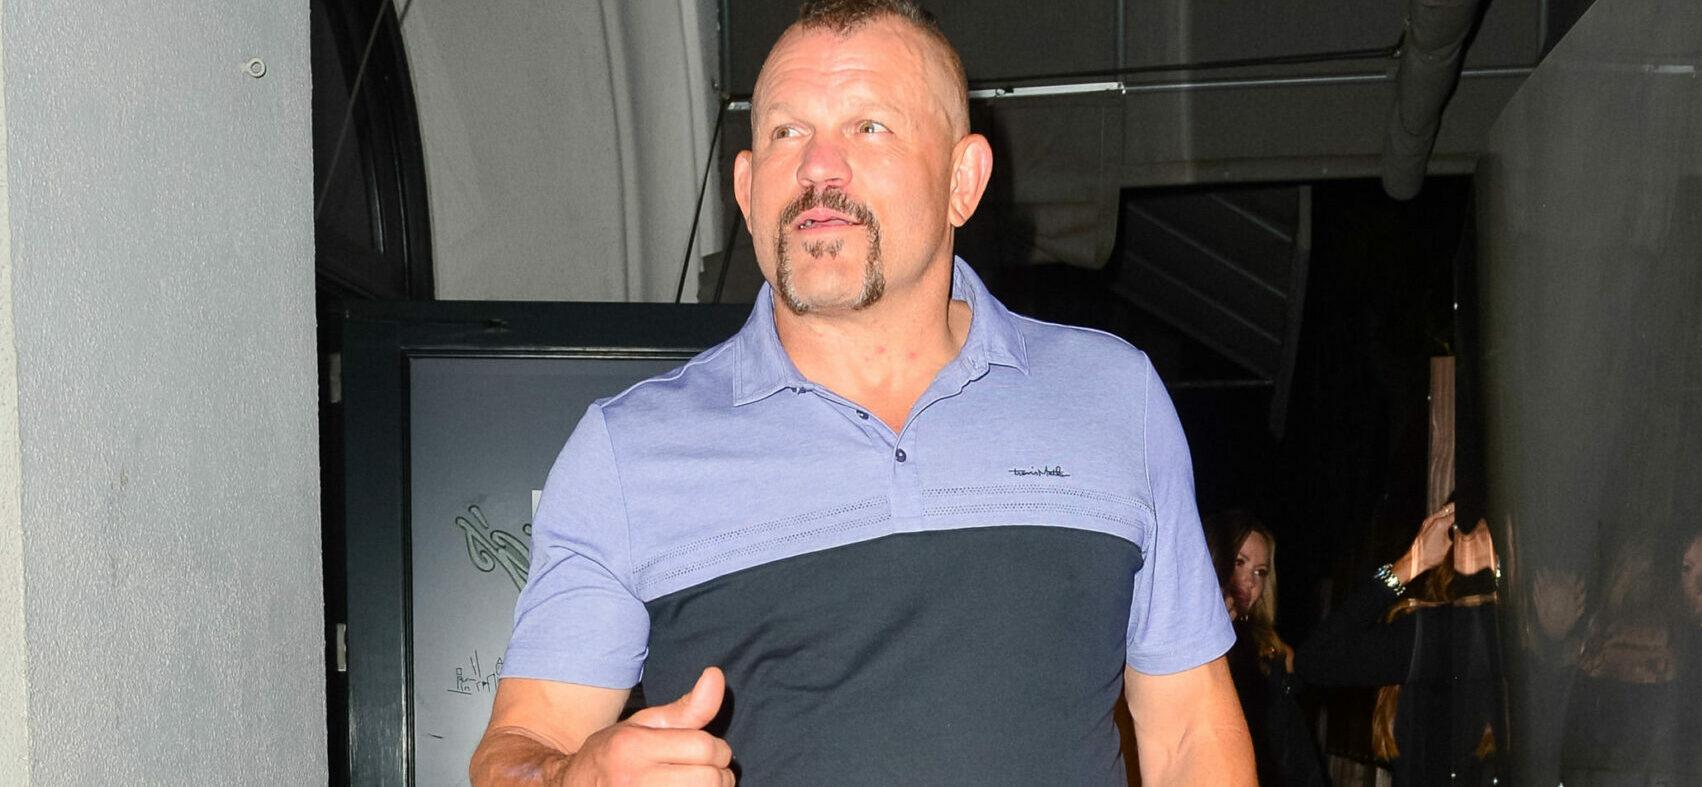 Chuck Liddell & Wife Drop Dueling Restraining Orders, Come To Custody Agreement